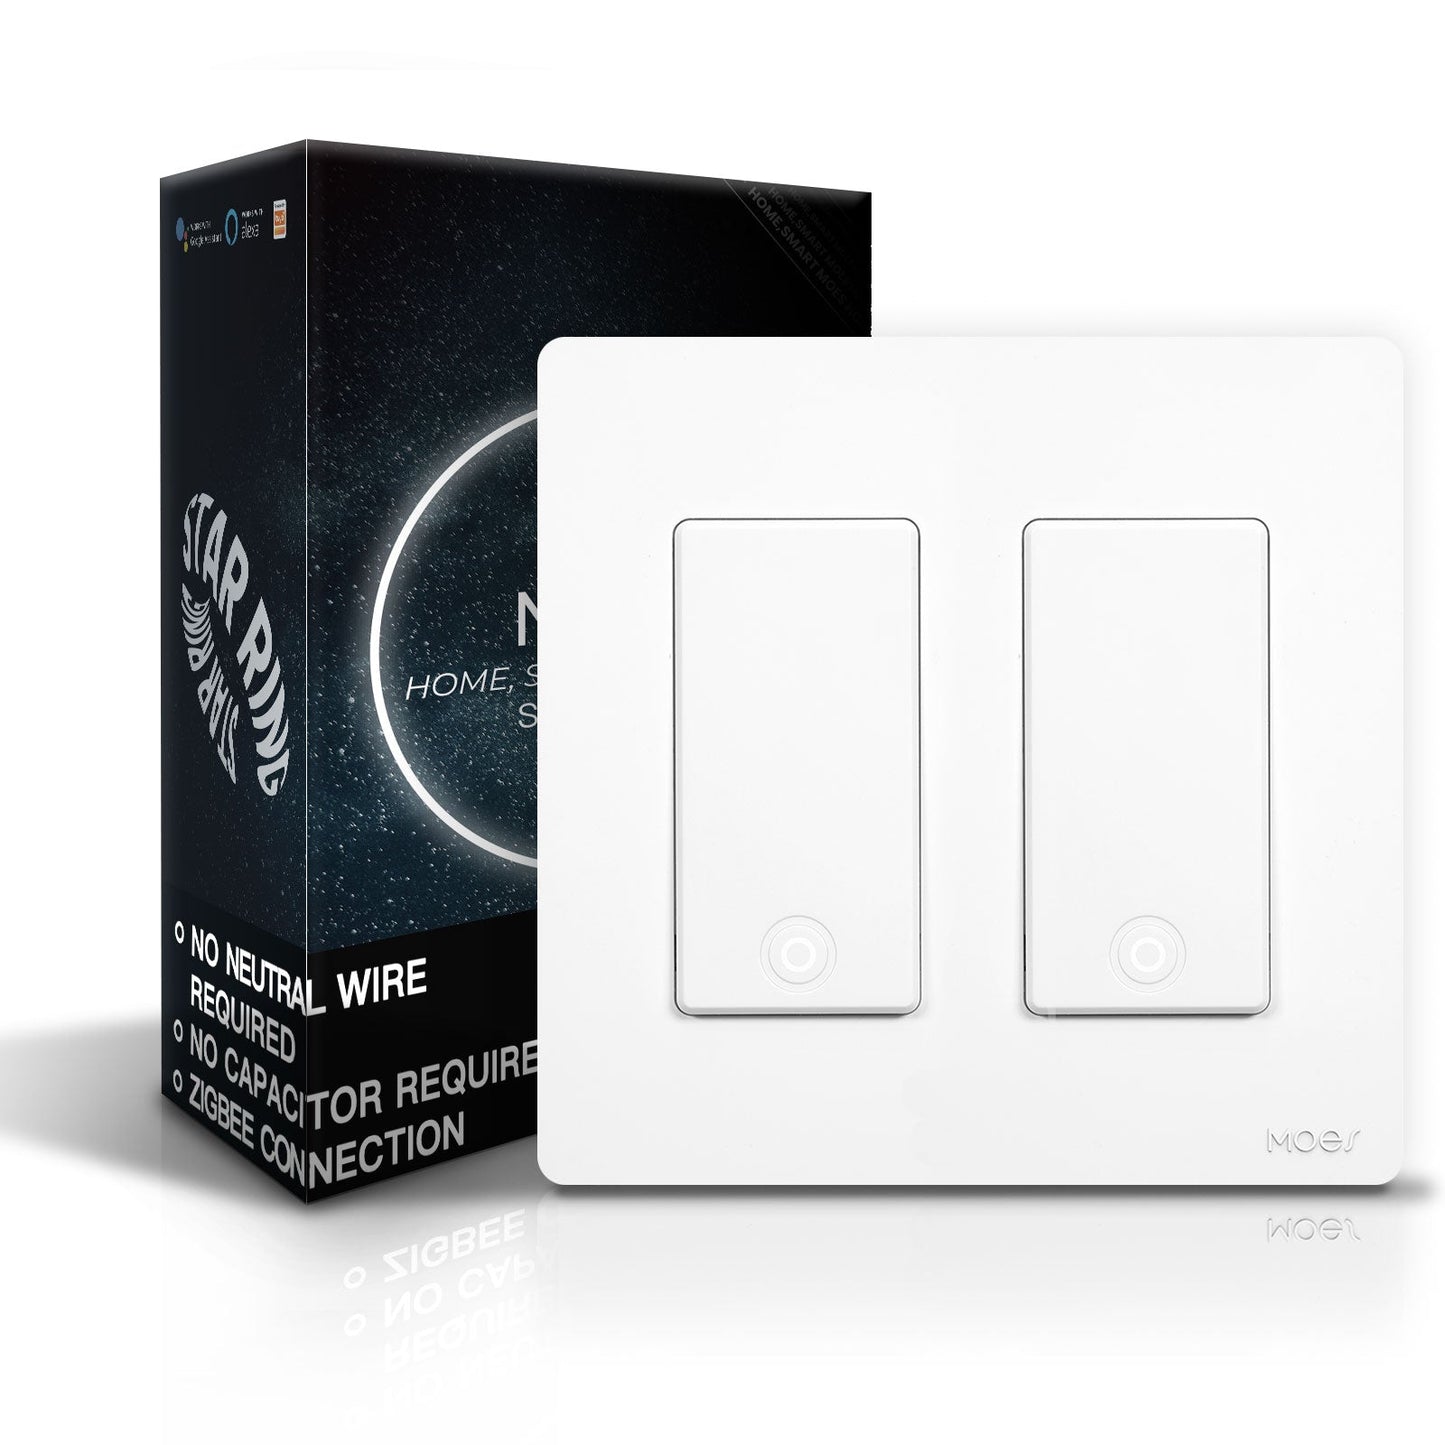 MOES Star Ring ZigBee Smart Light Switch Single Pole, No Neutral Required, No Capacitor wow smart